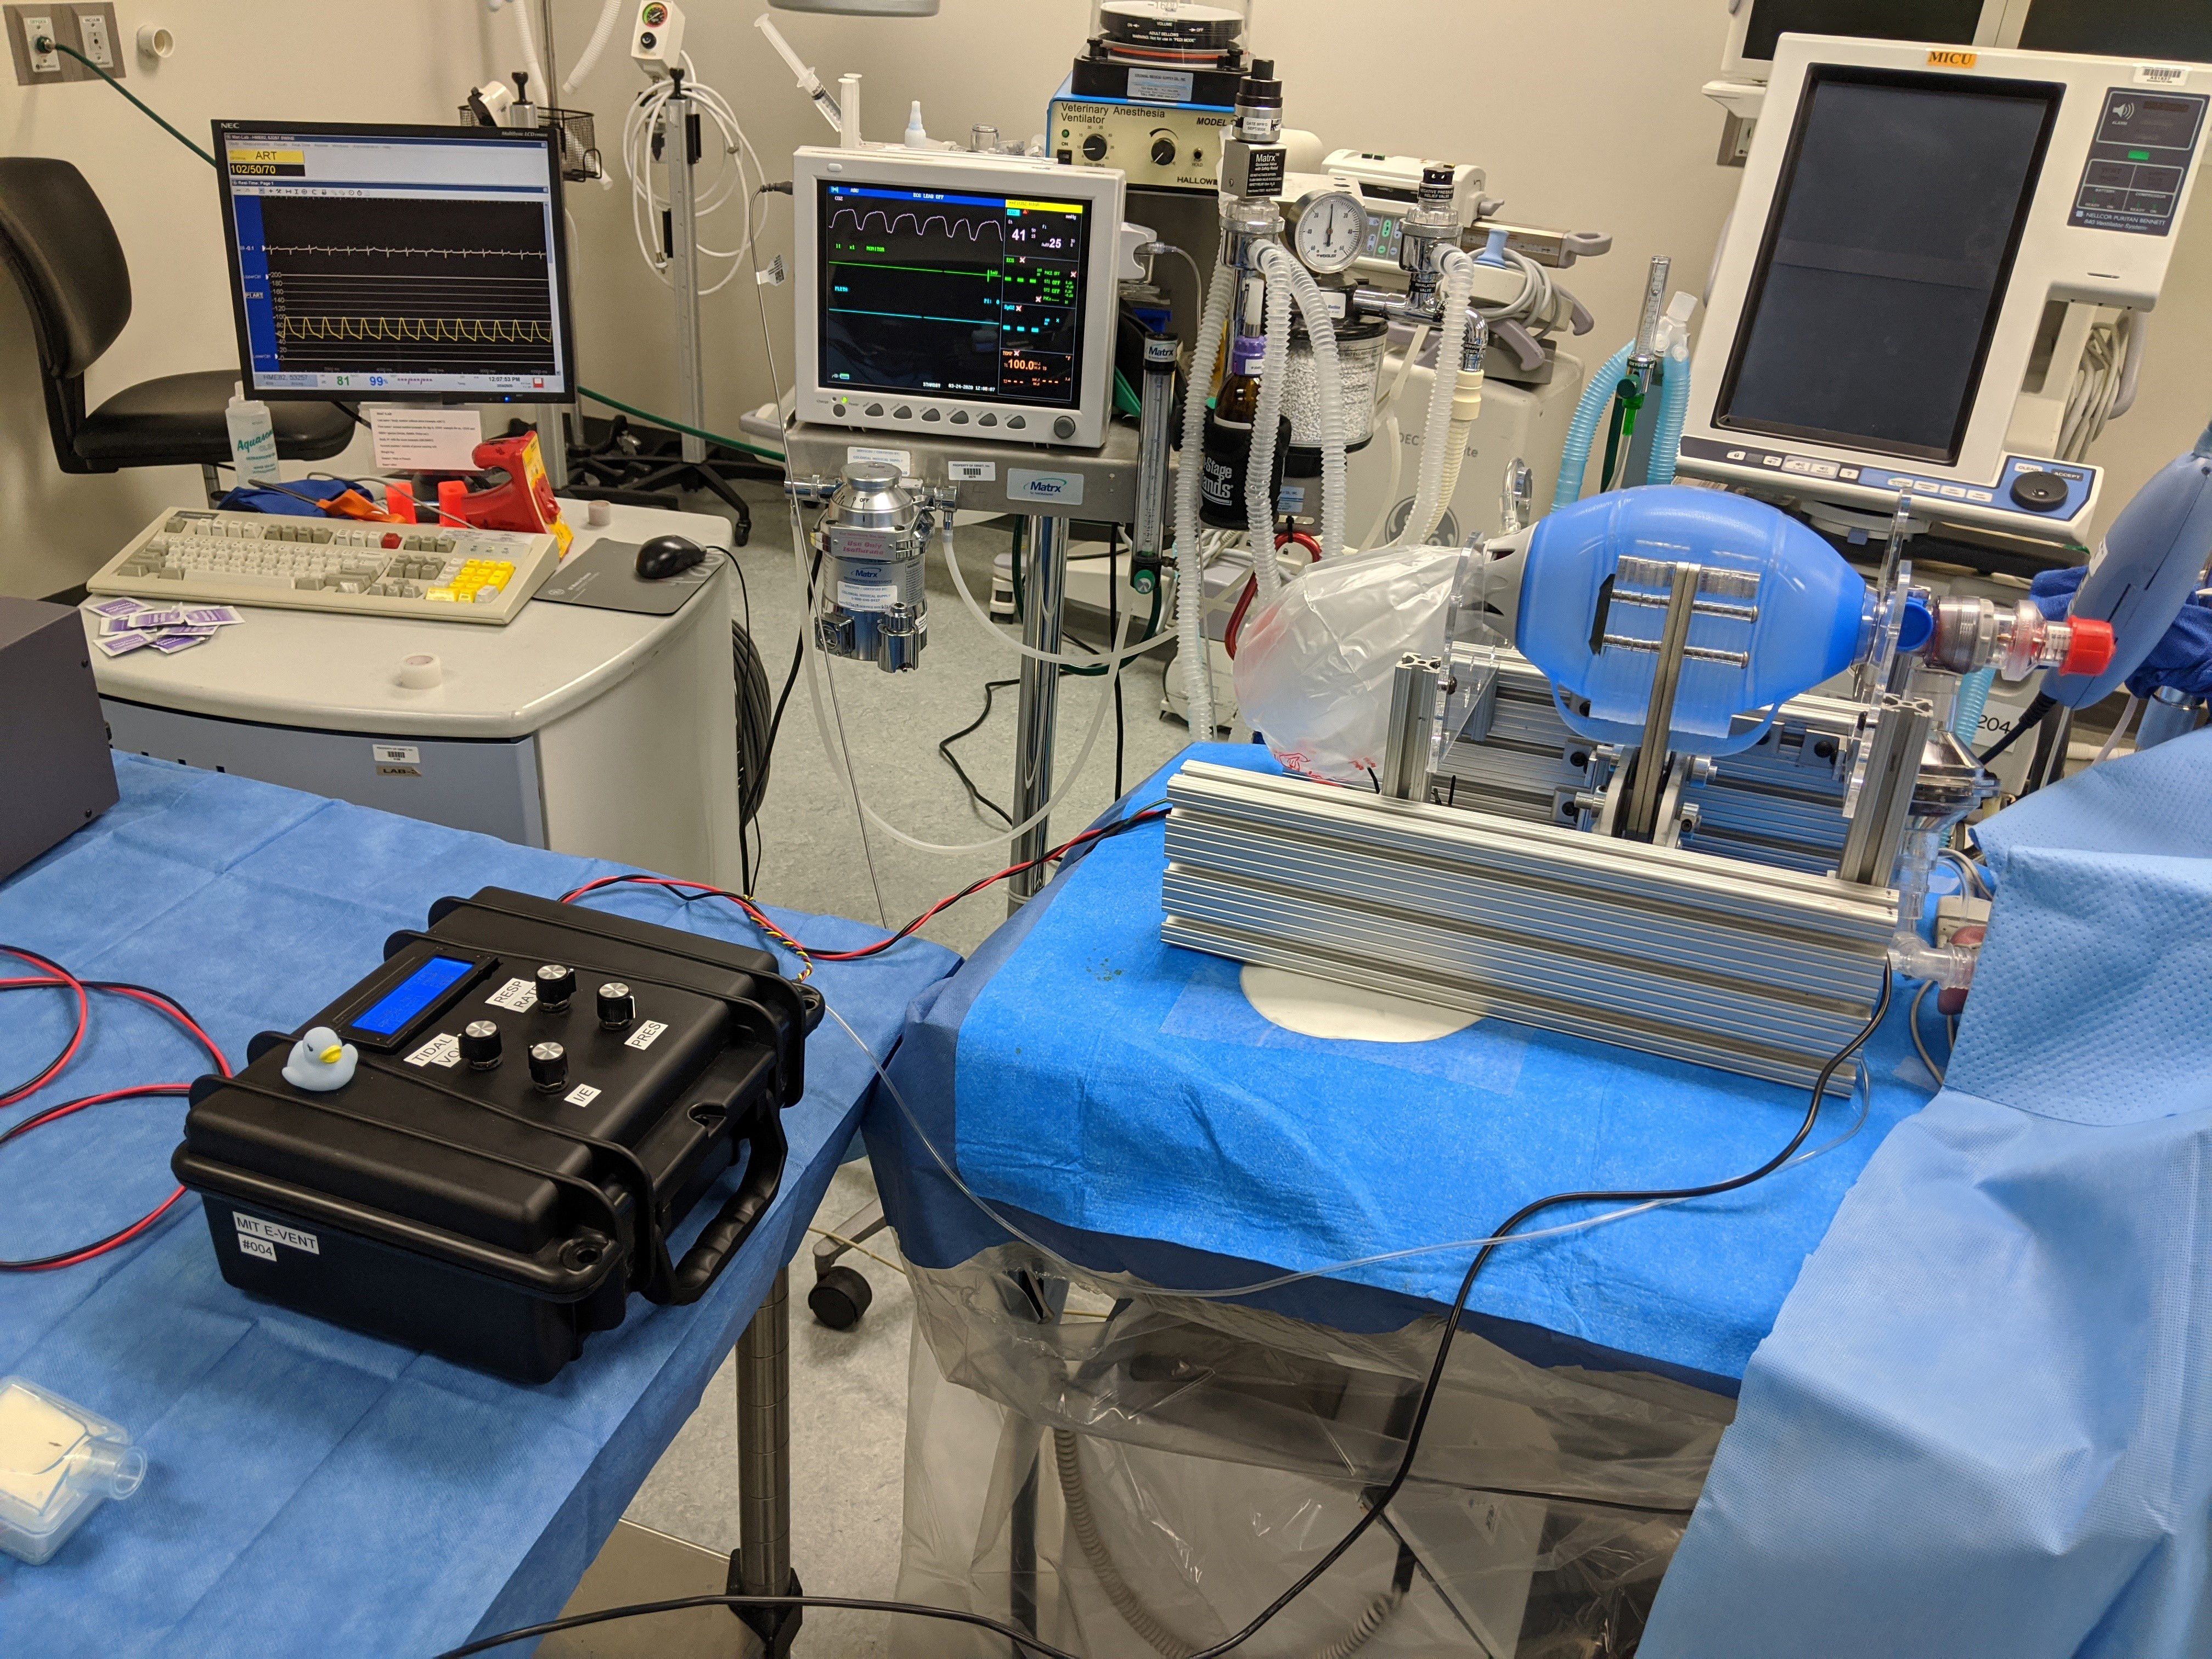 MIT-based team works on rapid deployment of open-source, low-cost ventilator, MIT News